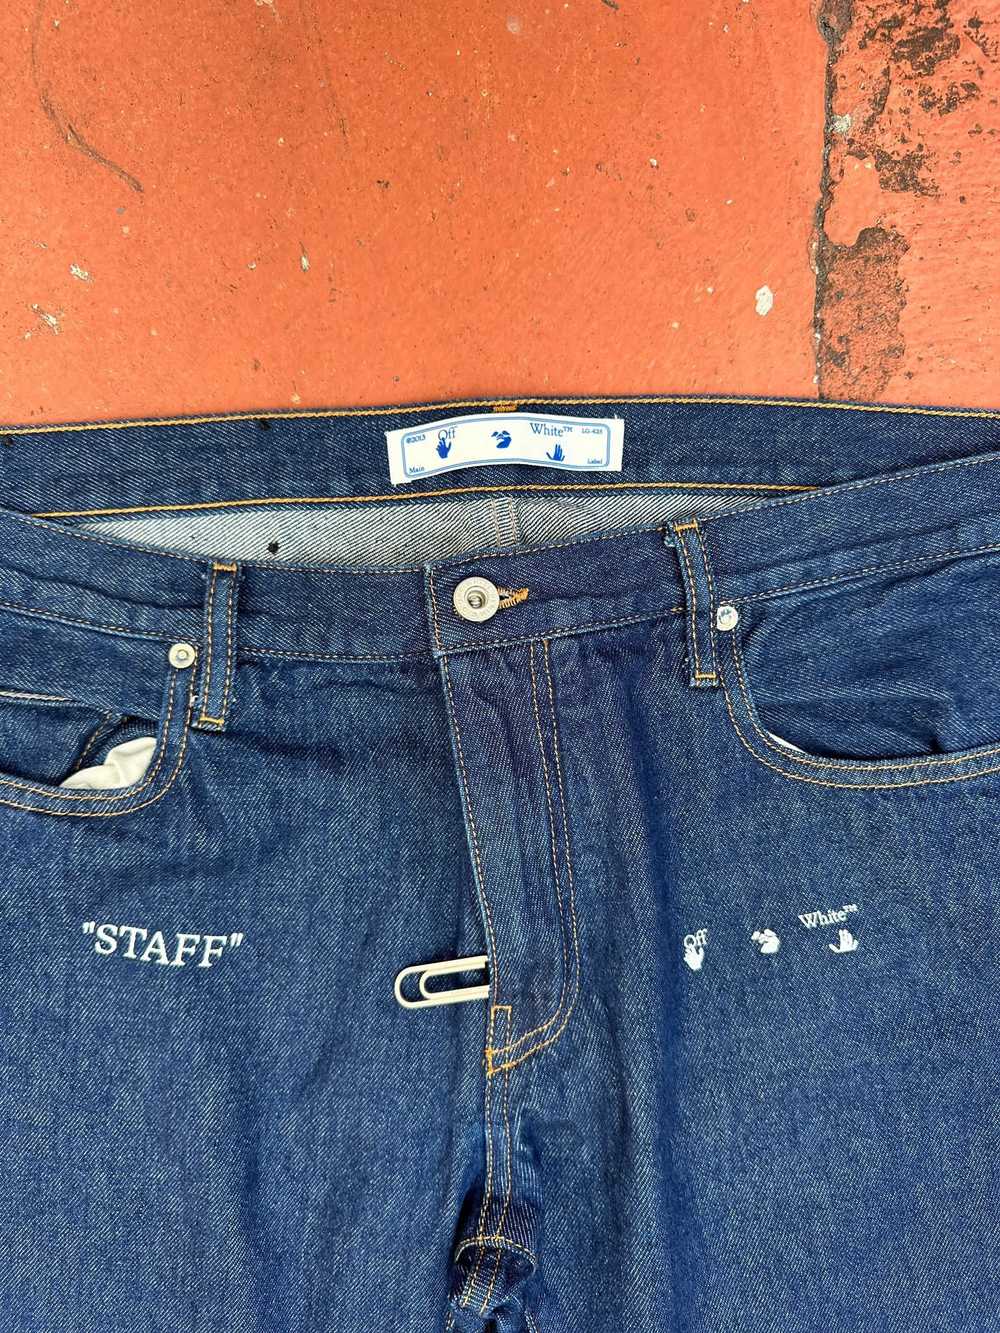 Off-White Off-White c/o Virgil Abloh "Staff" jeans - image 2